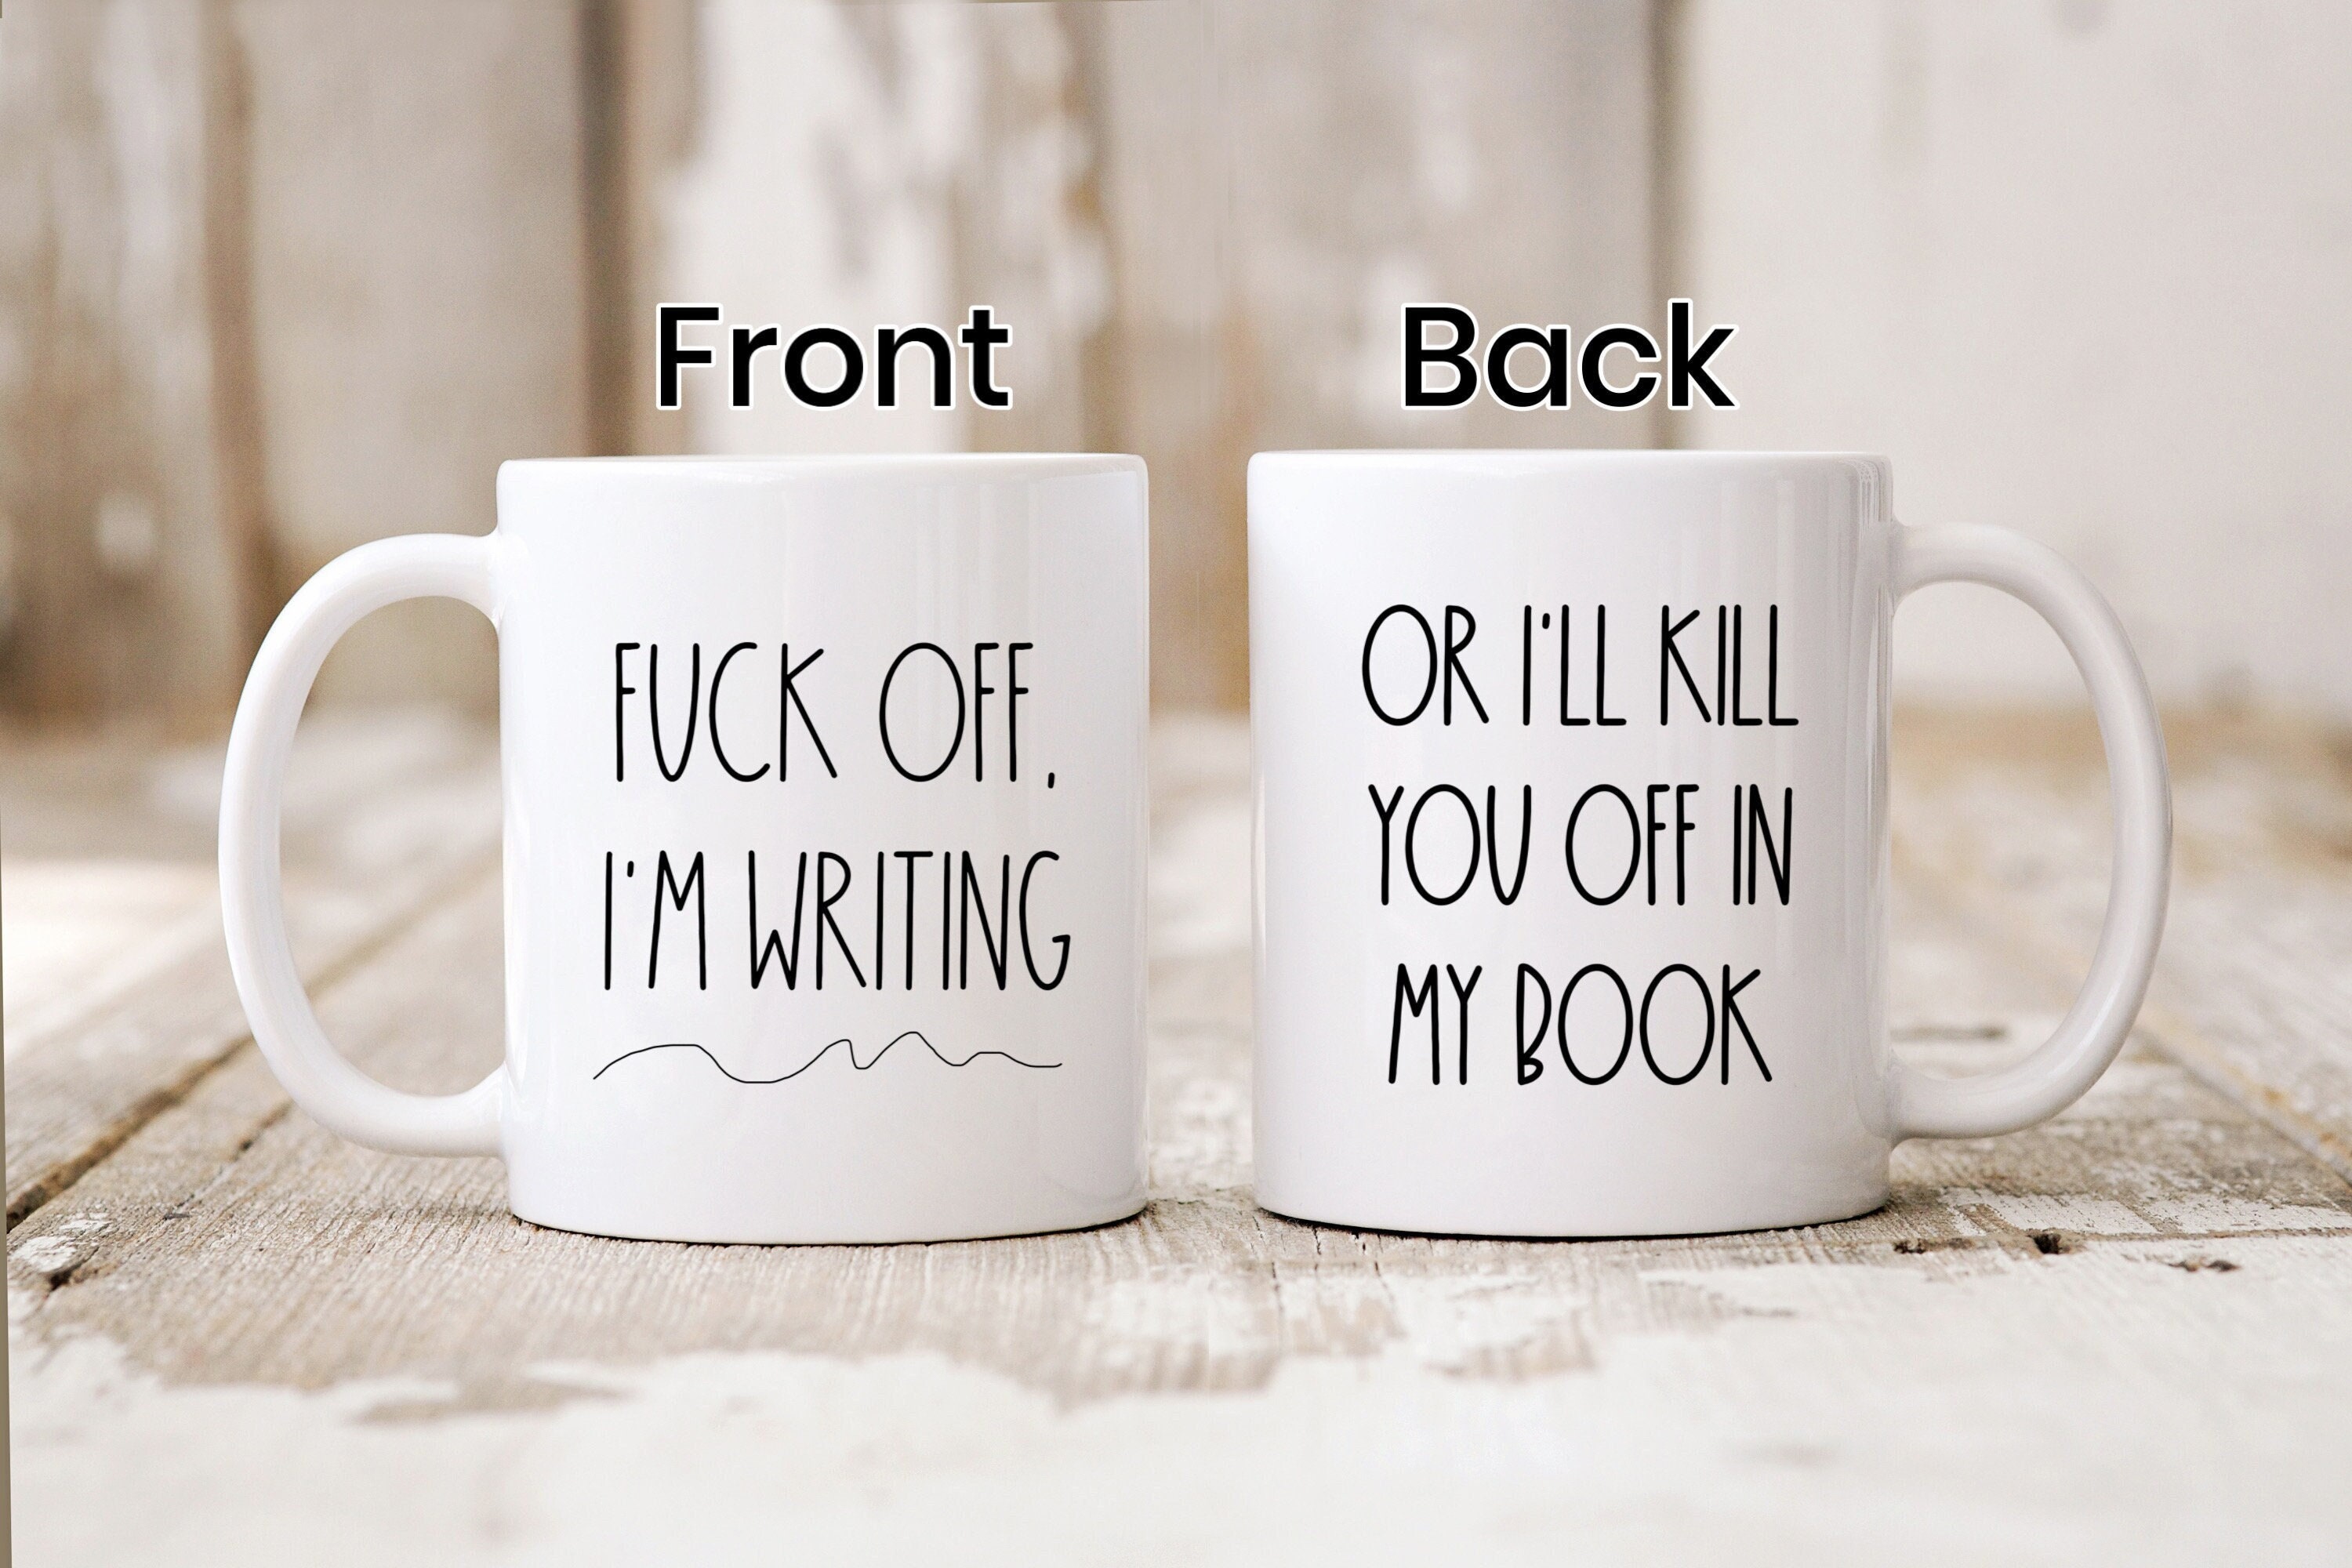 Writer Gift Ideas Please Do Not Annoy the Writer Gifts for 